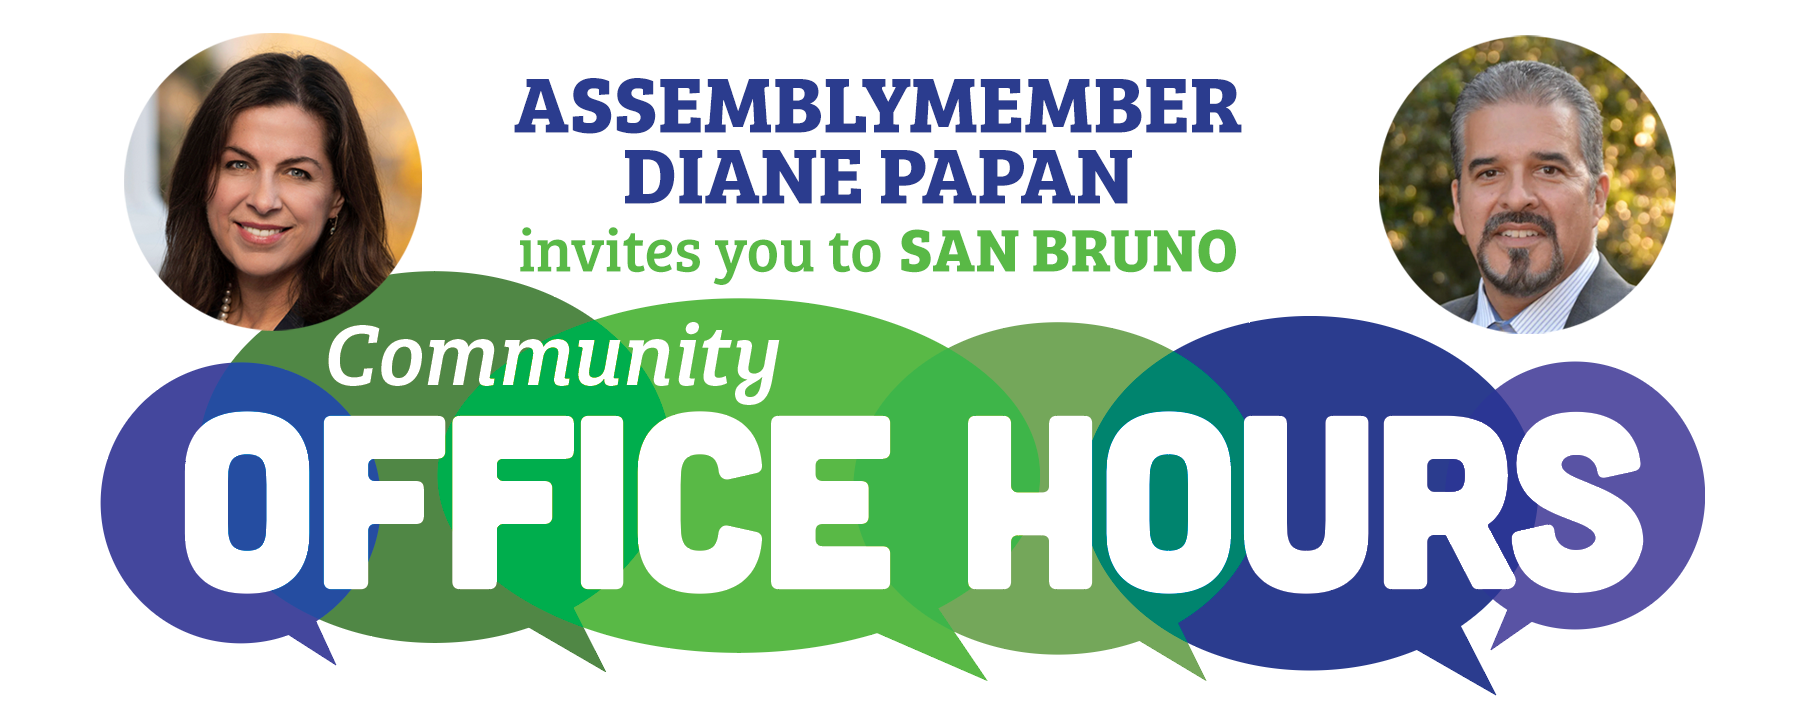 Community Office Hours